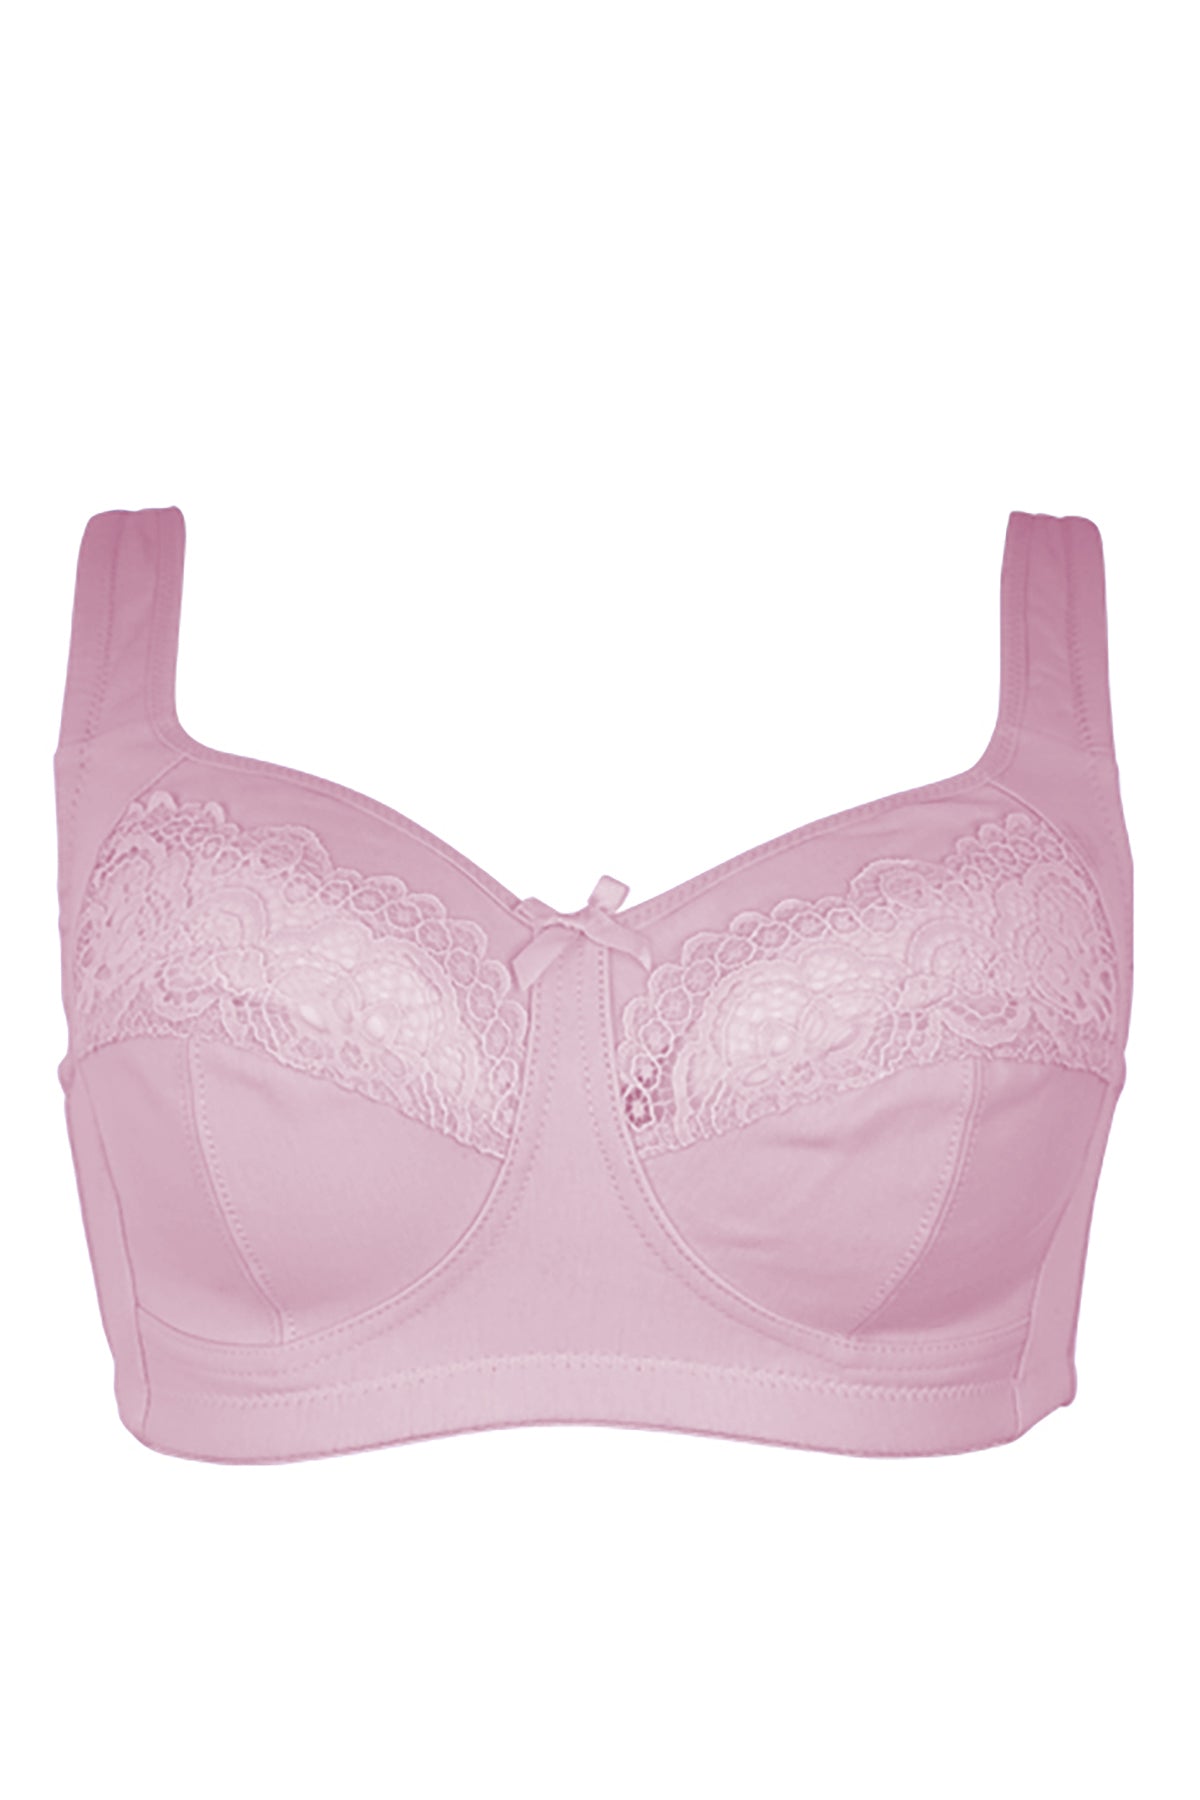 Baby Pink Nylon & Lace Evernew Lace Bra : Buy Online At Best Prices In  Pakistan